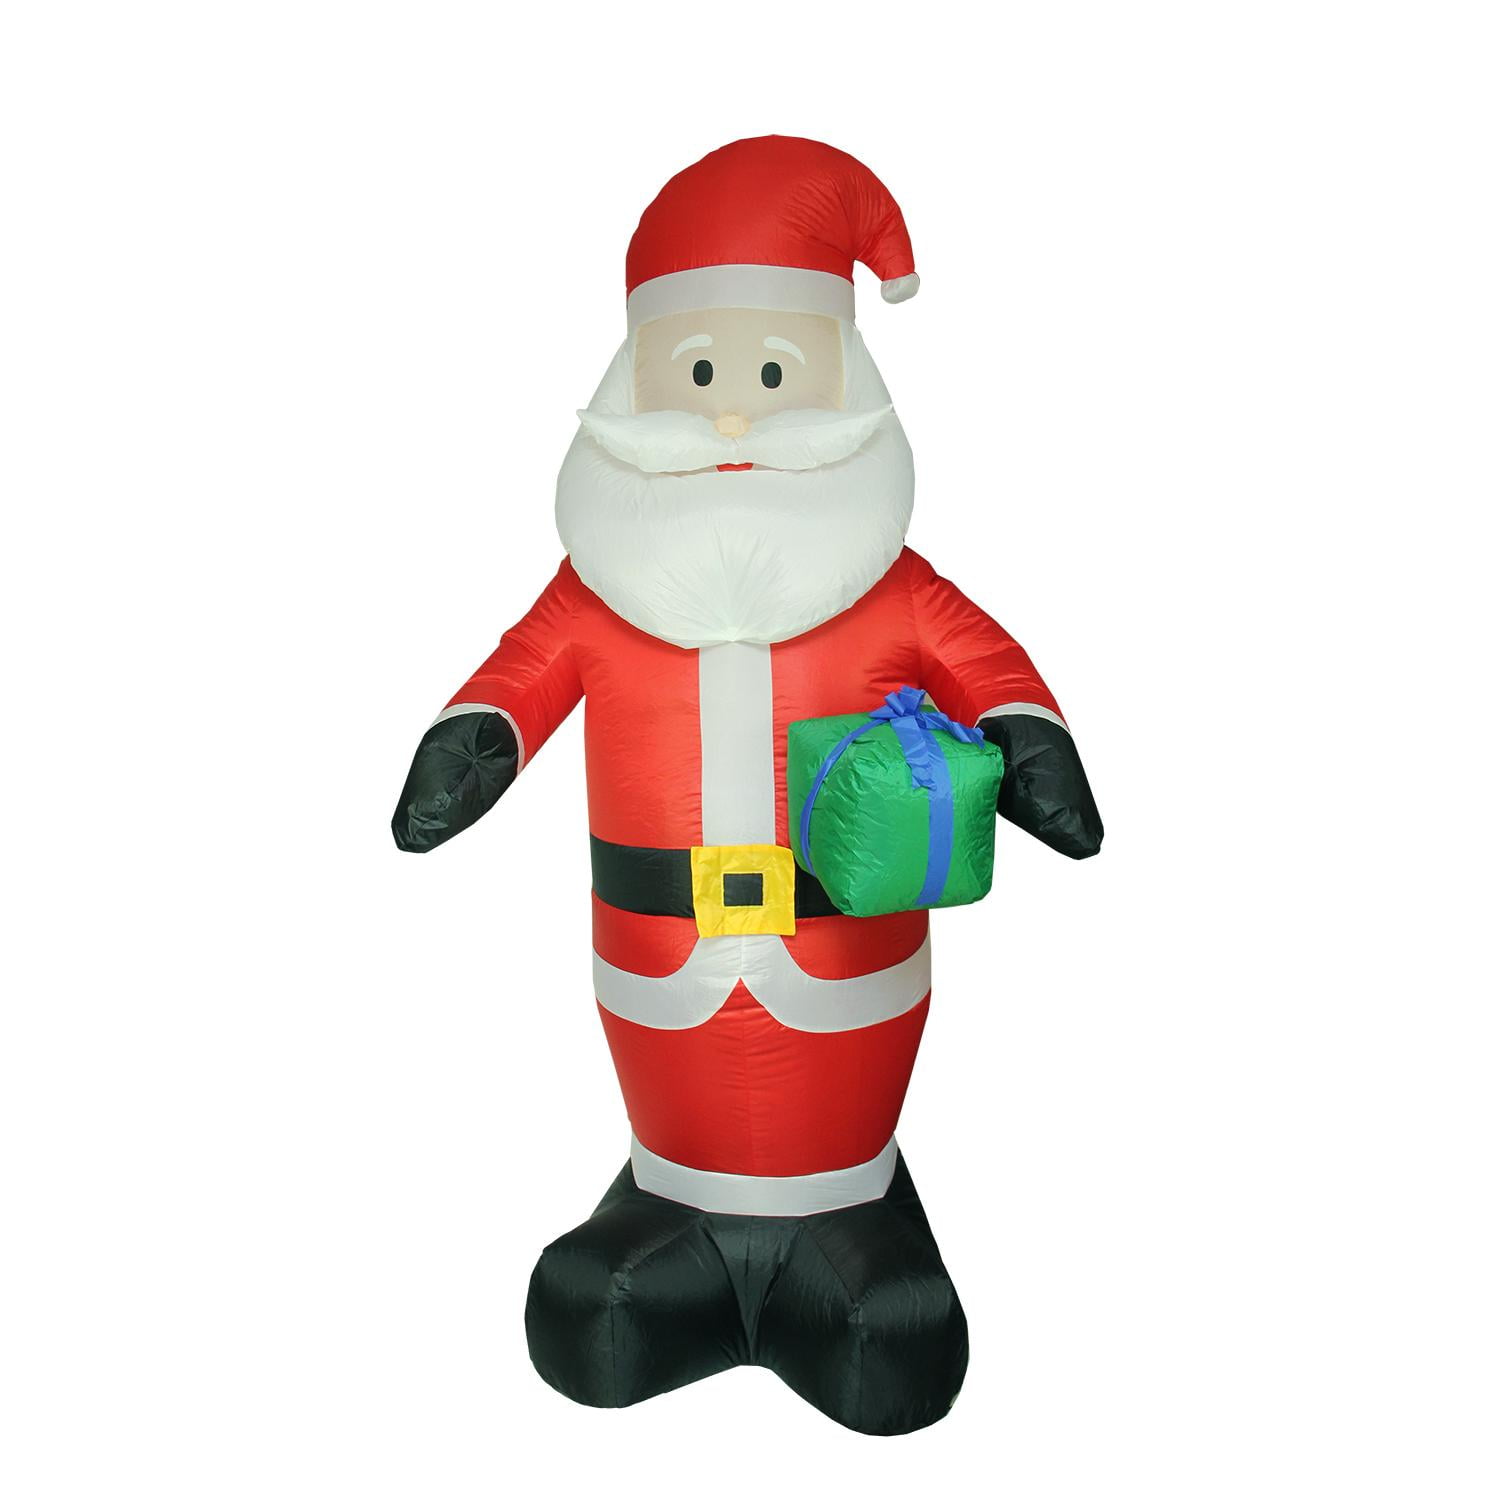 Creatice Inflatable Christmas Decorations Walmart for Simple Design